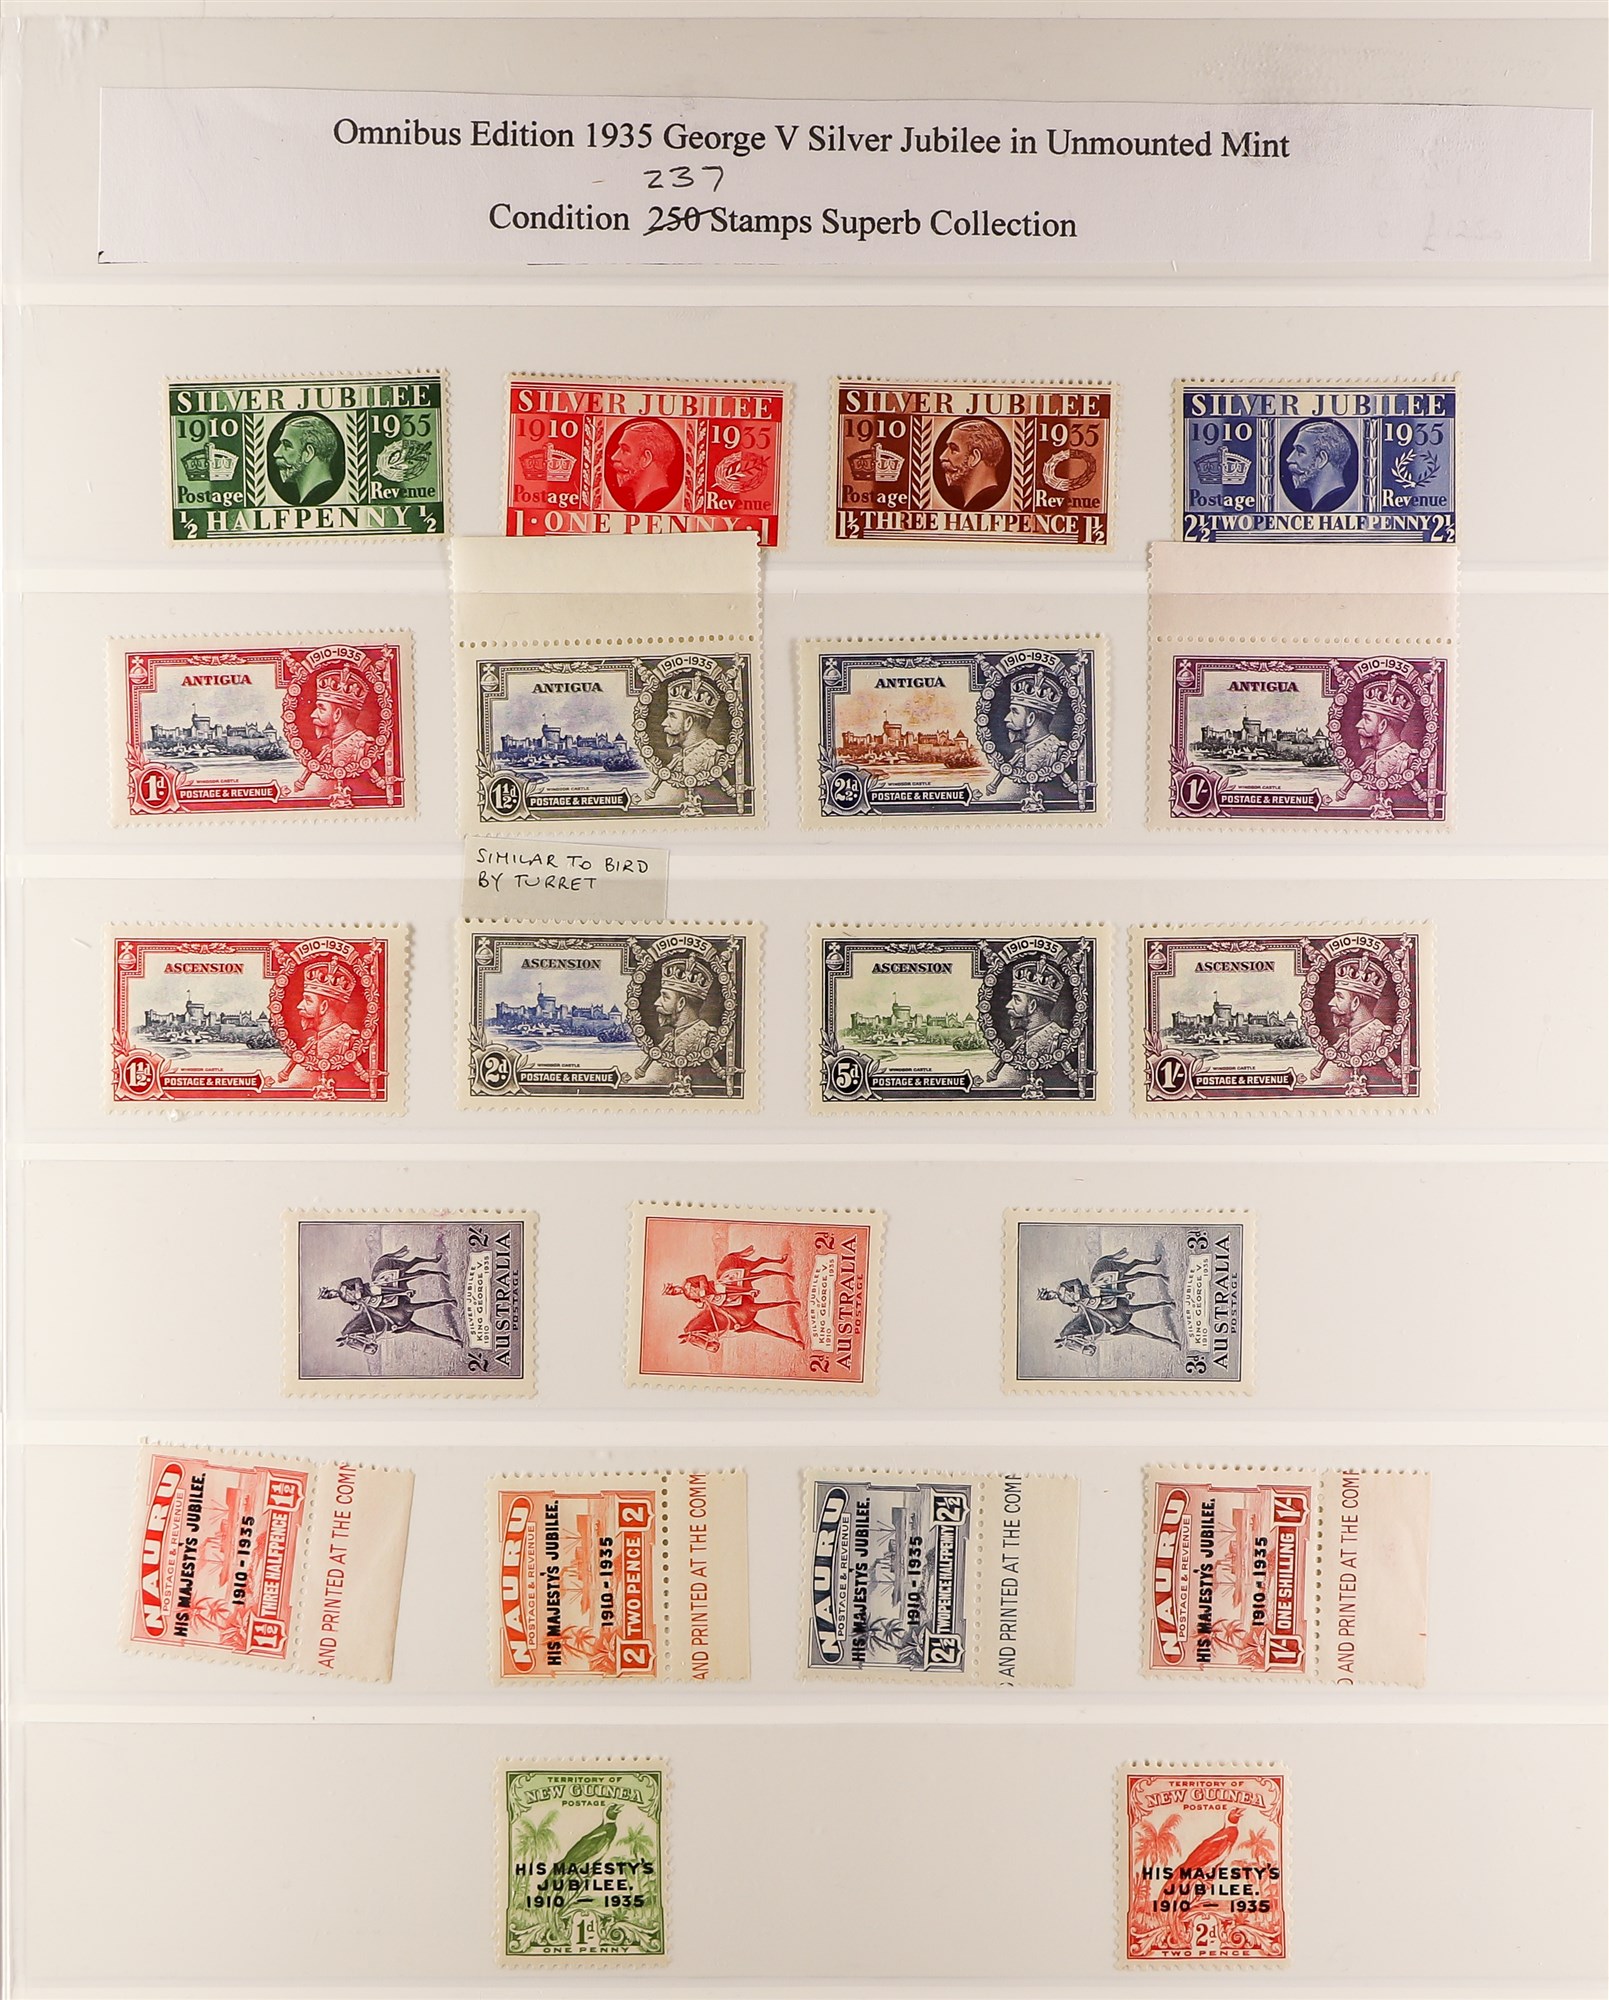 COLLECTIONS & ACCUMULATIONS 1935 SILVER JUBILEE OMNIBUS near- complete British Empire issue